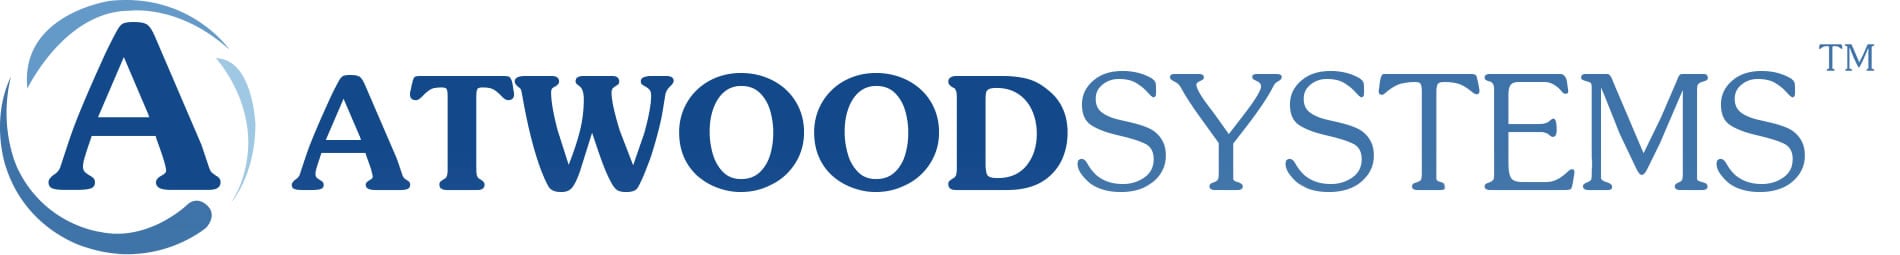 [ Atwood Systems Logo Image ]